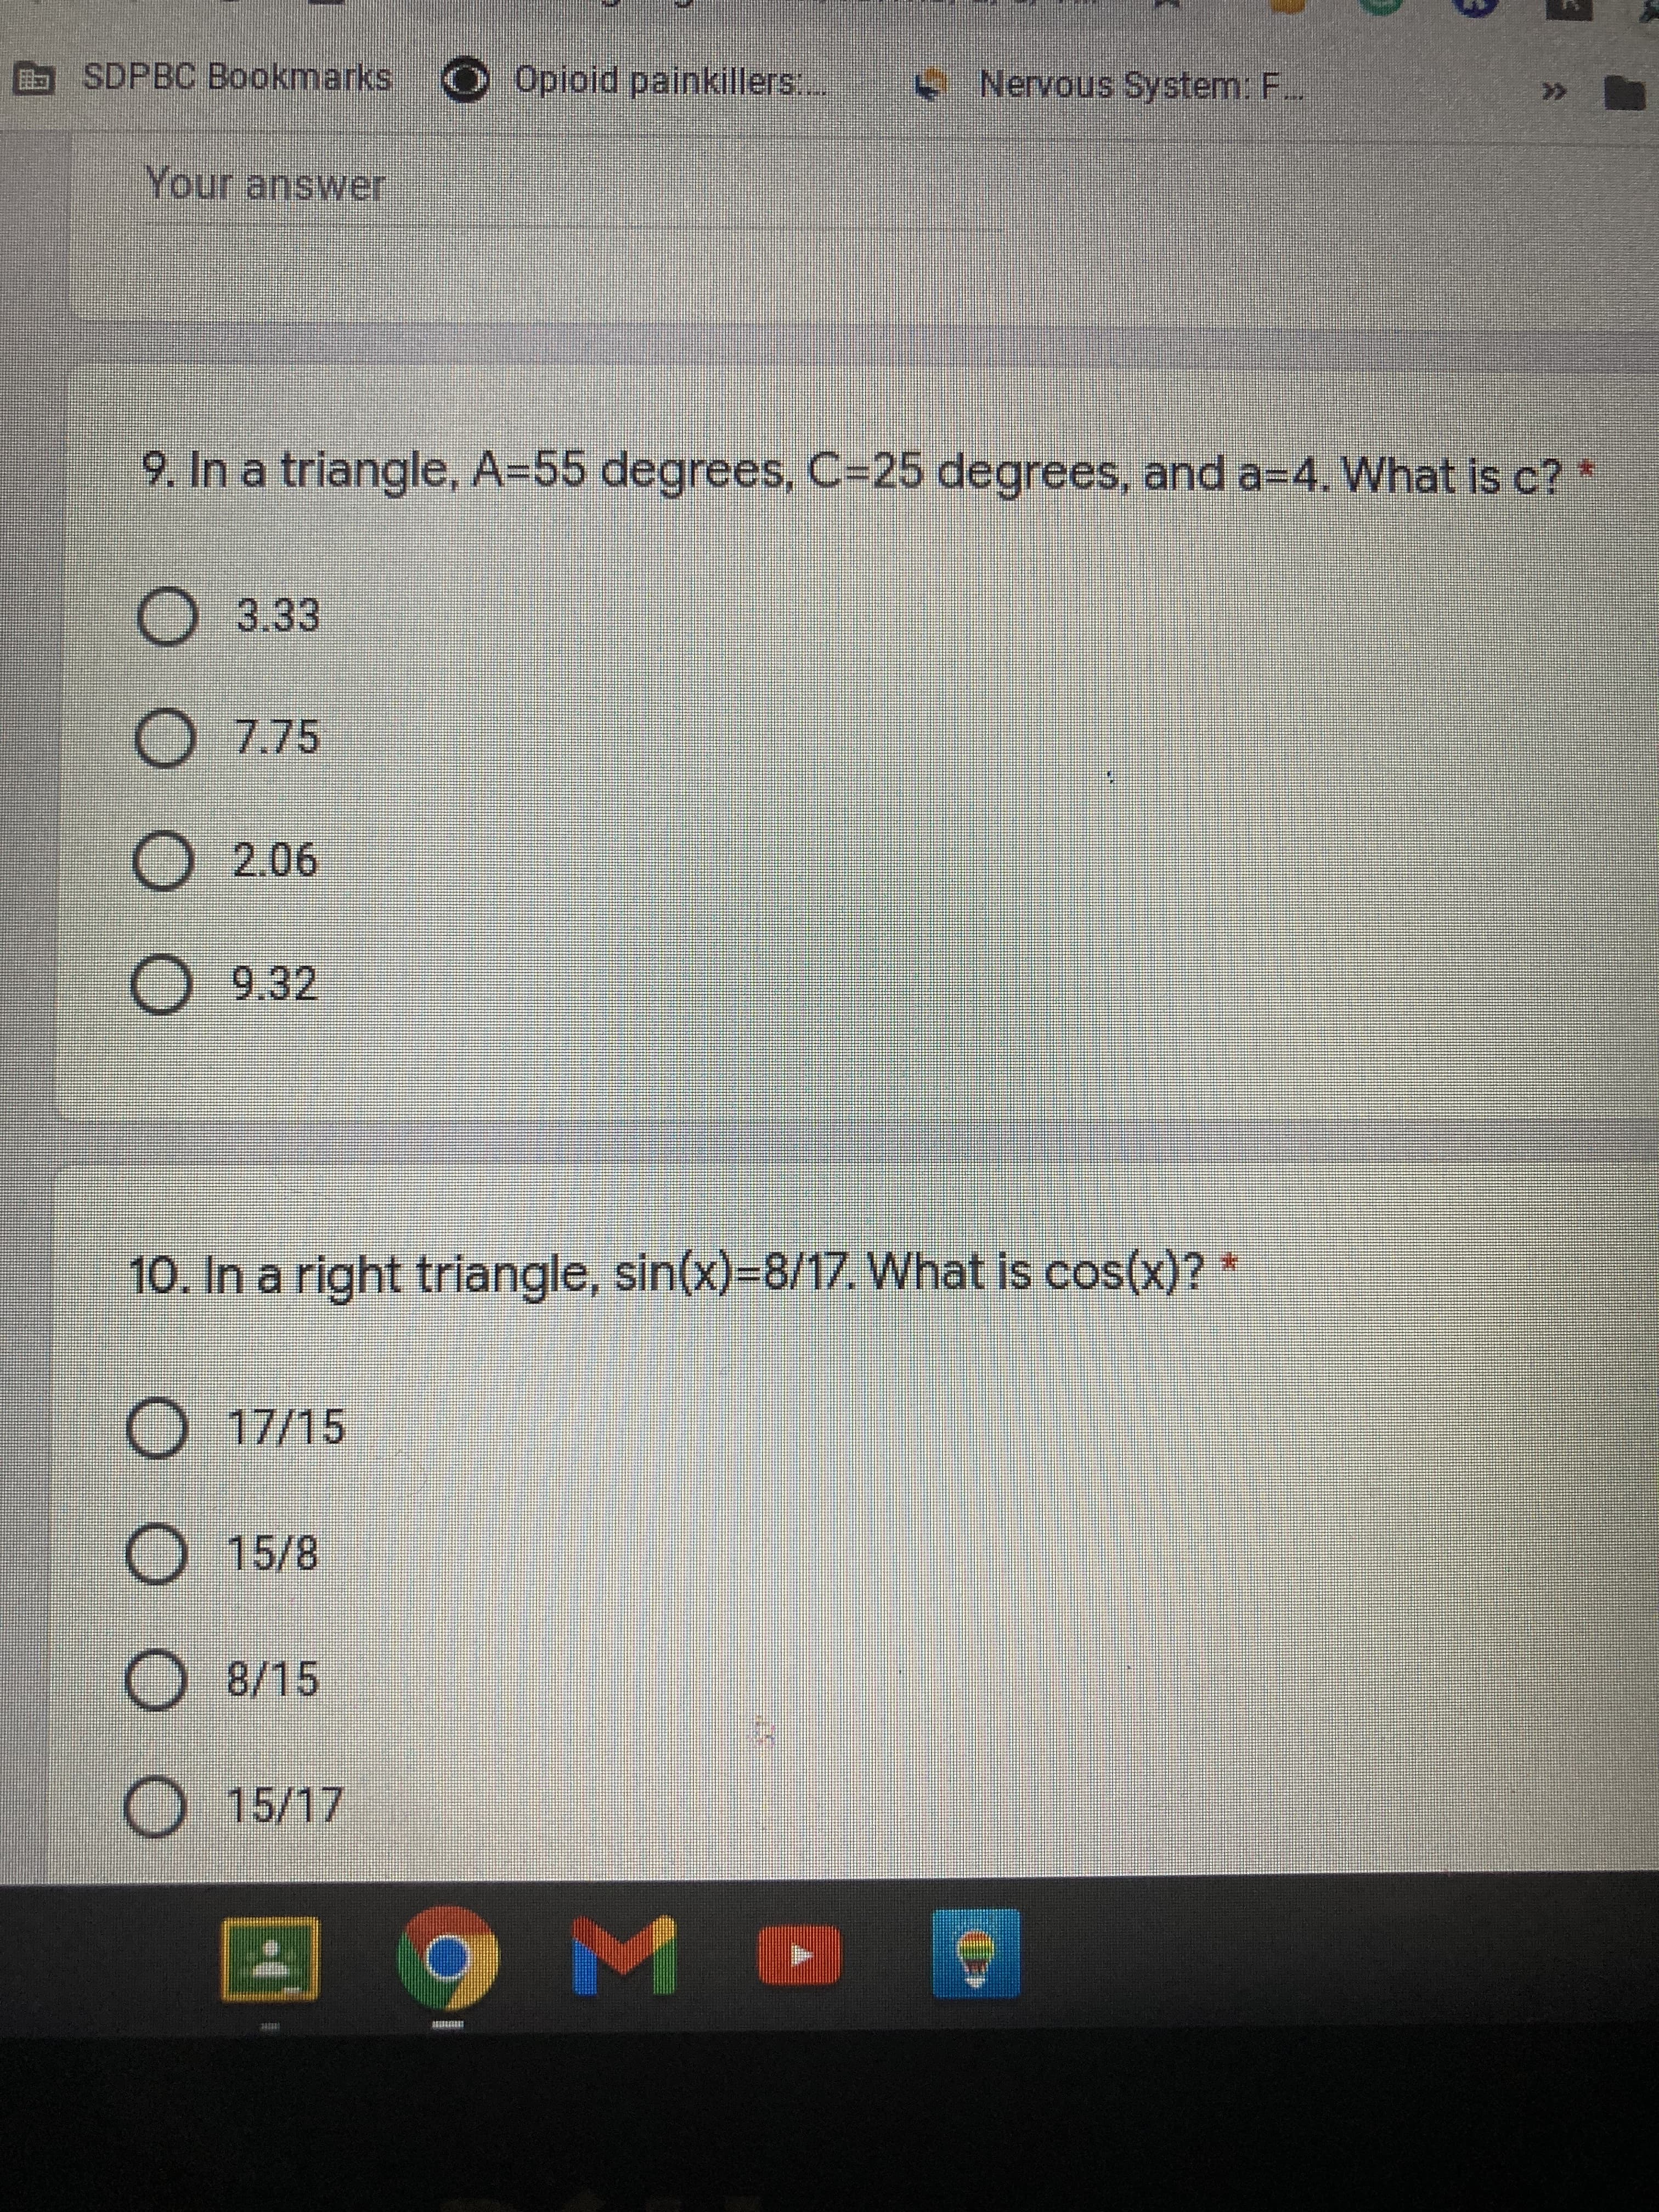 9. In a triangle, A=55 degrees, C=25 degrees, and a=4. What is c?
